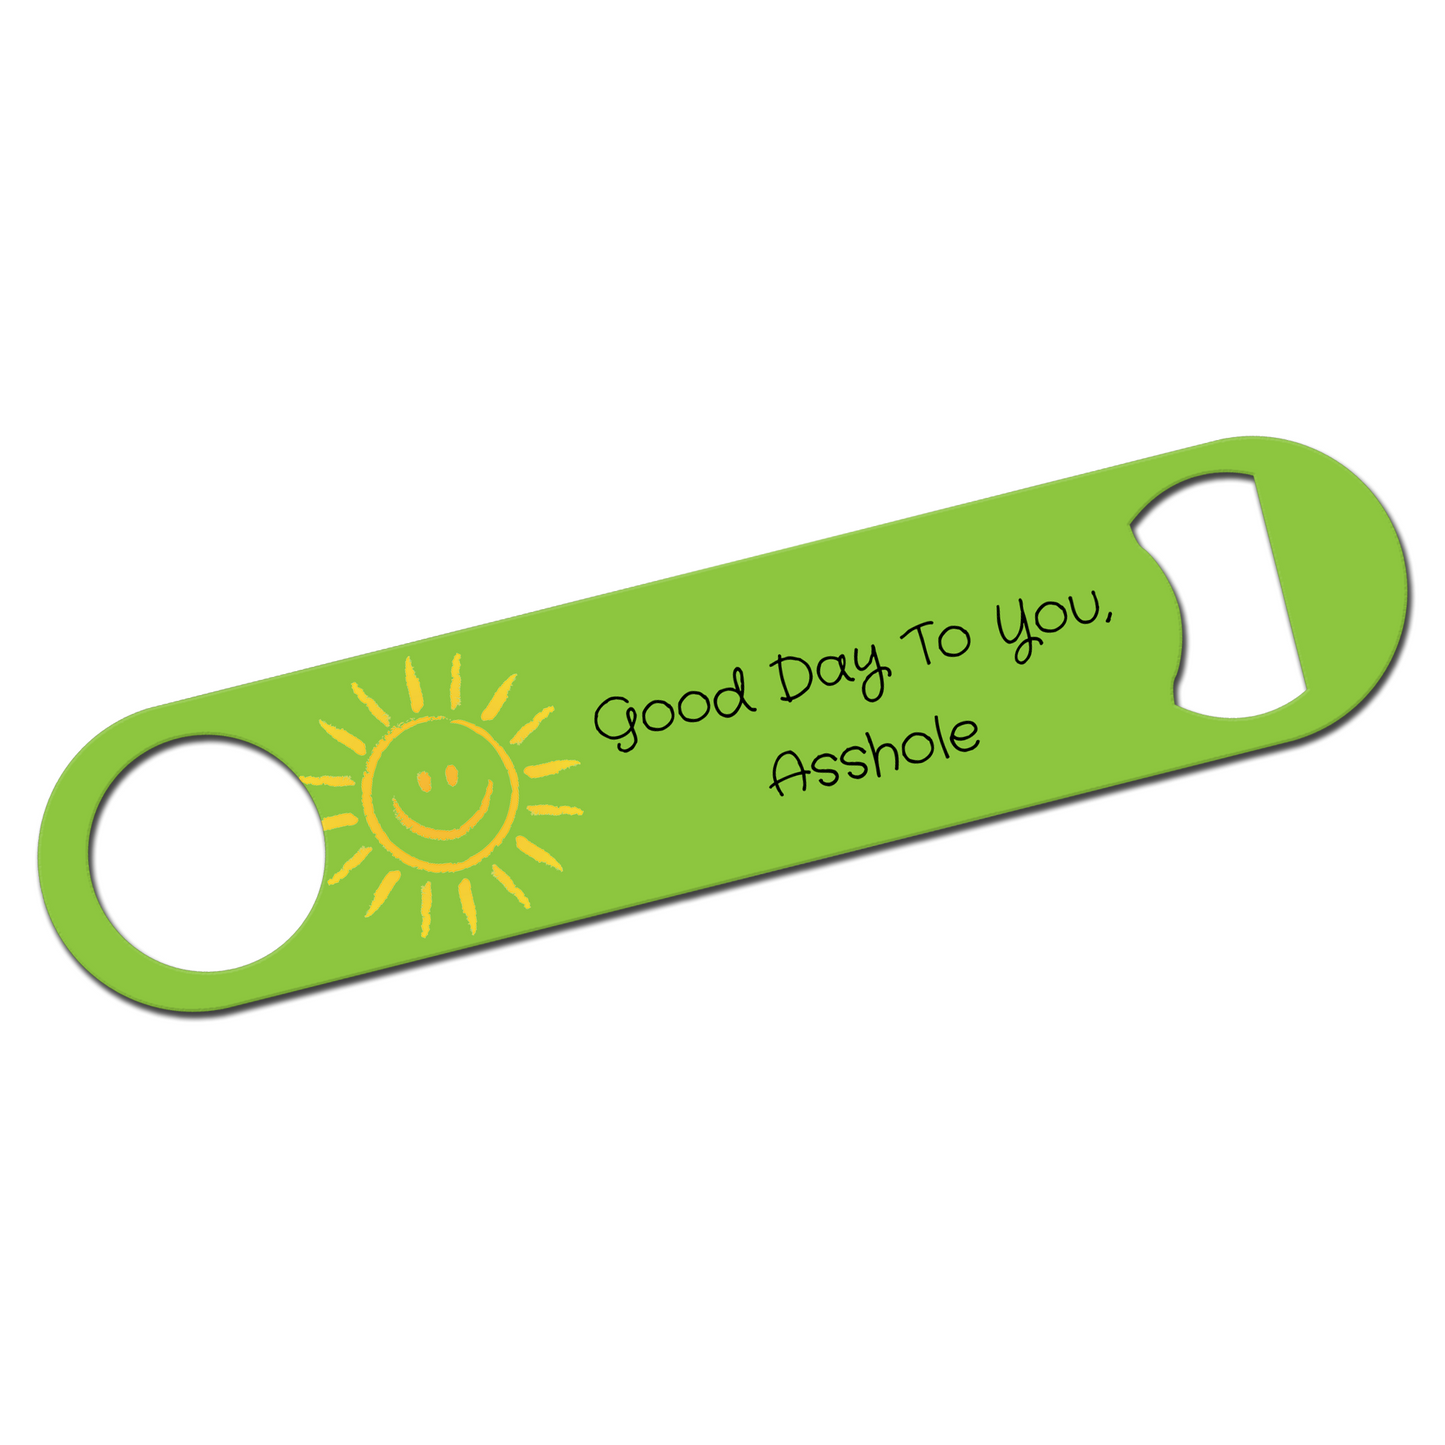 Good Day To You Asshole Bottle Opener